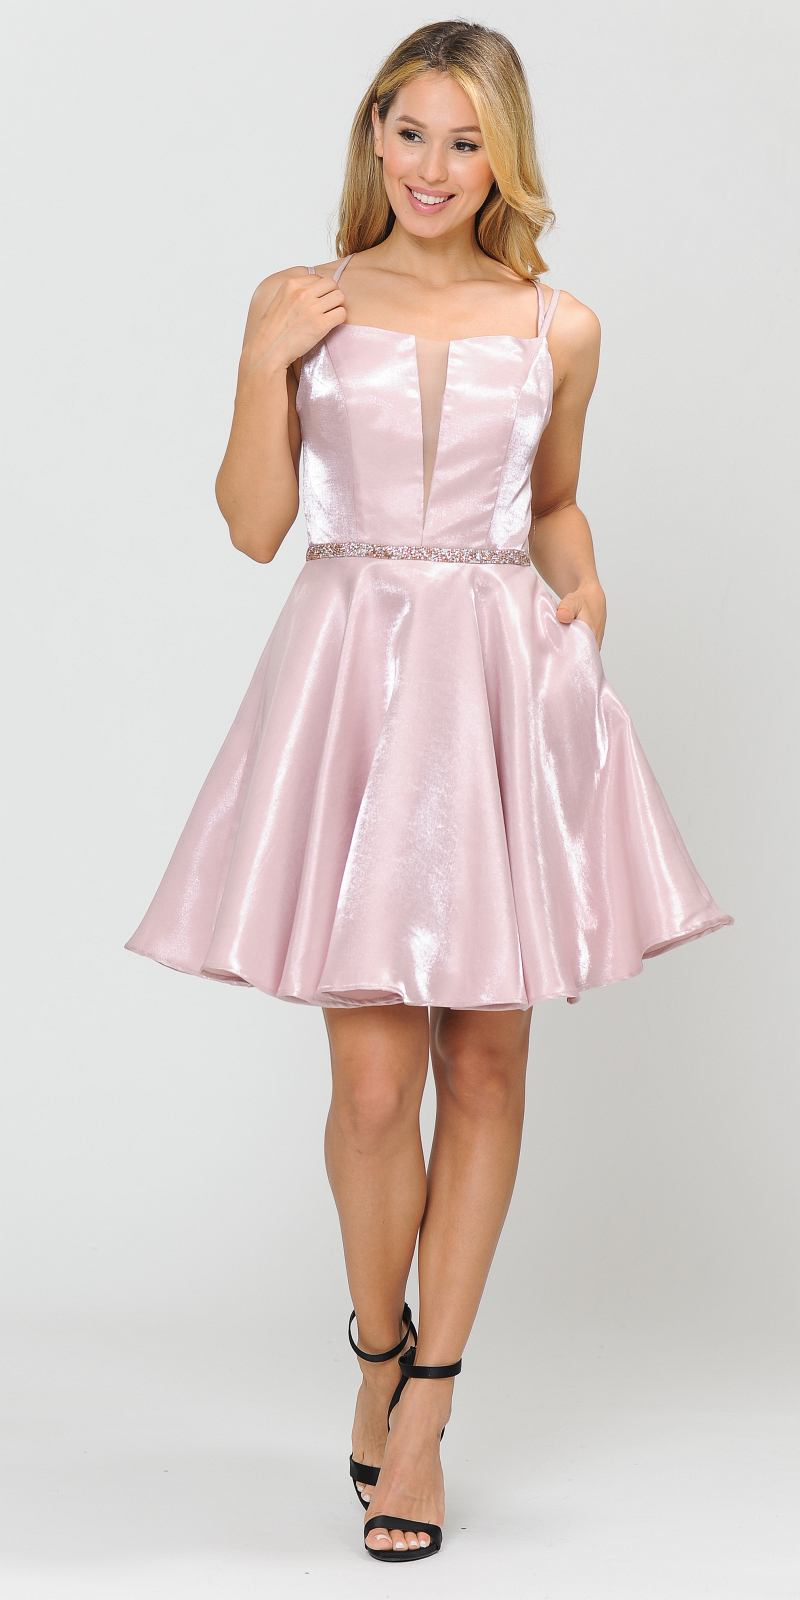 Poly USA 8447 Embellished Waist with Pockets Homecoming Short Dress Rose Gold